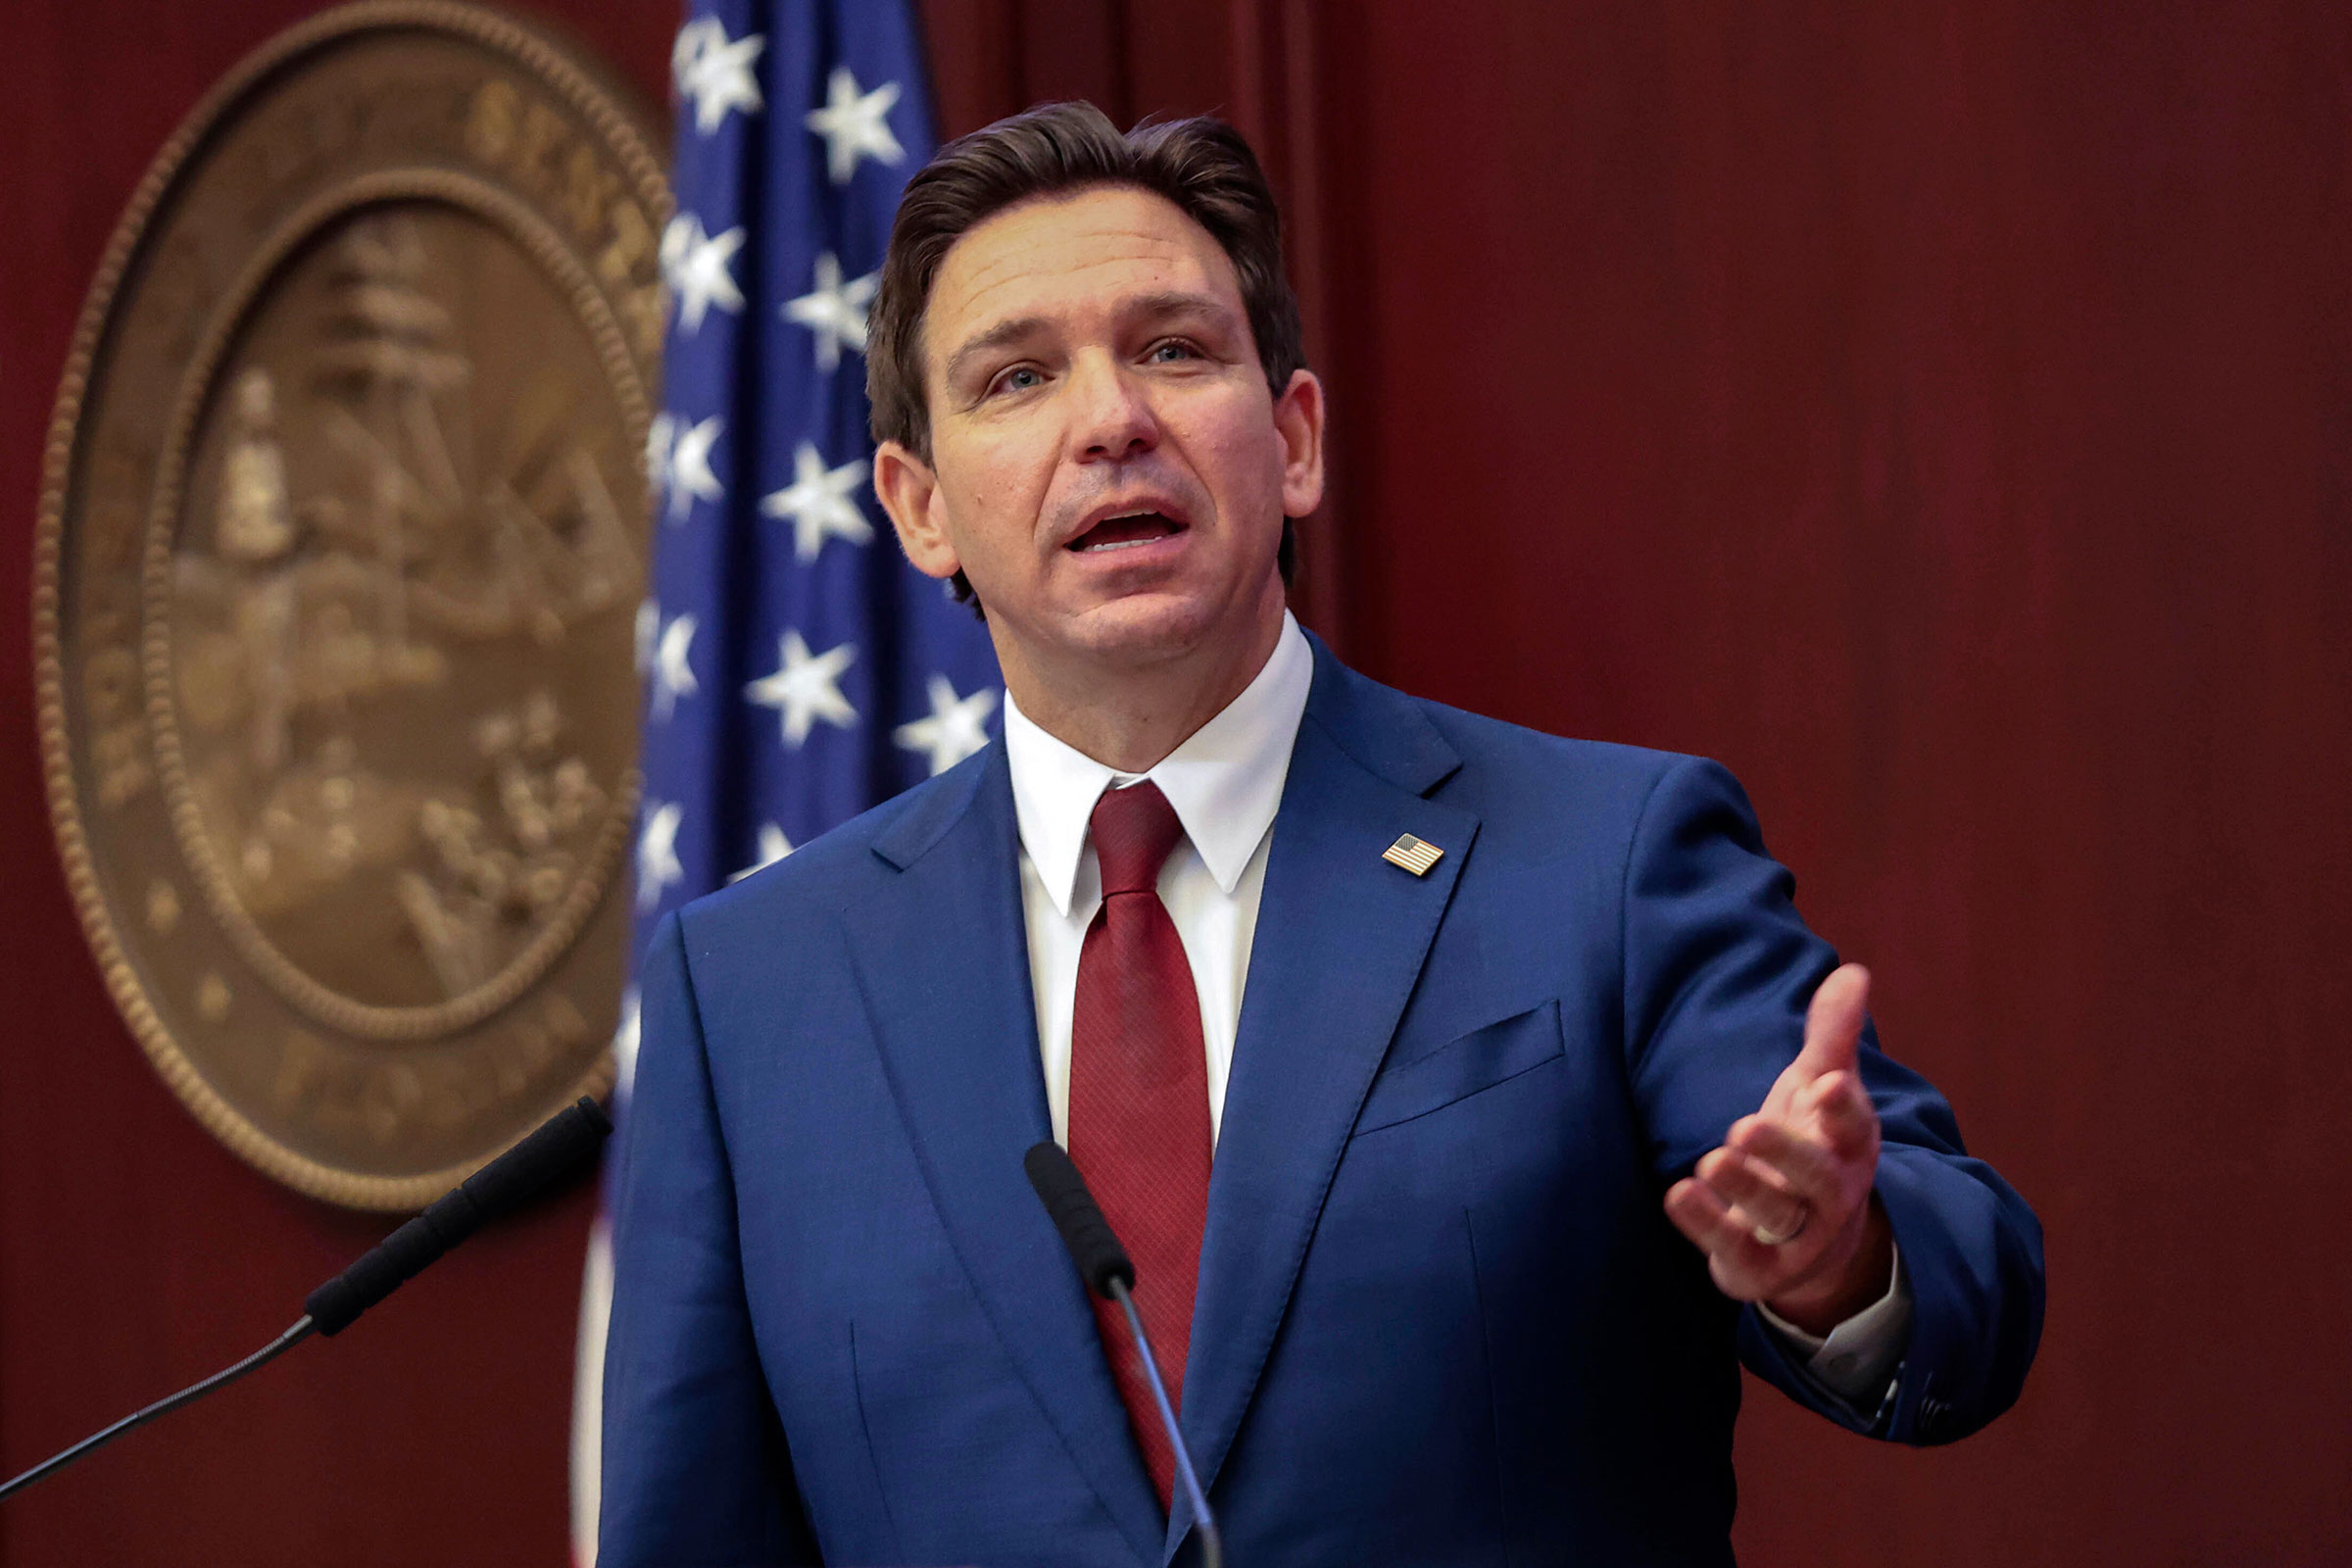 Florida Gov. Ron DeSantis gives his State of the State address during a joint session of the Senate and House of Representatives in Tallahassee, Florida, on Tuesday, January 9.